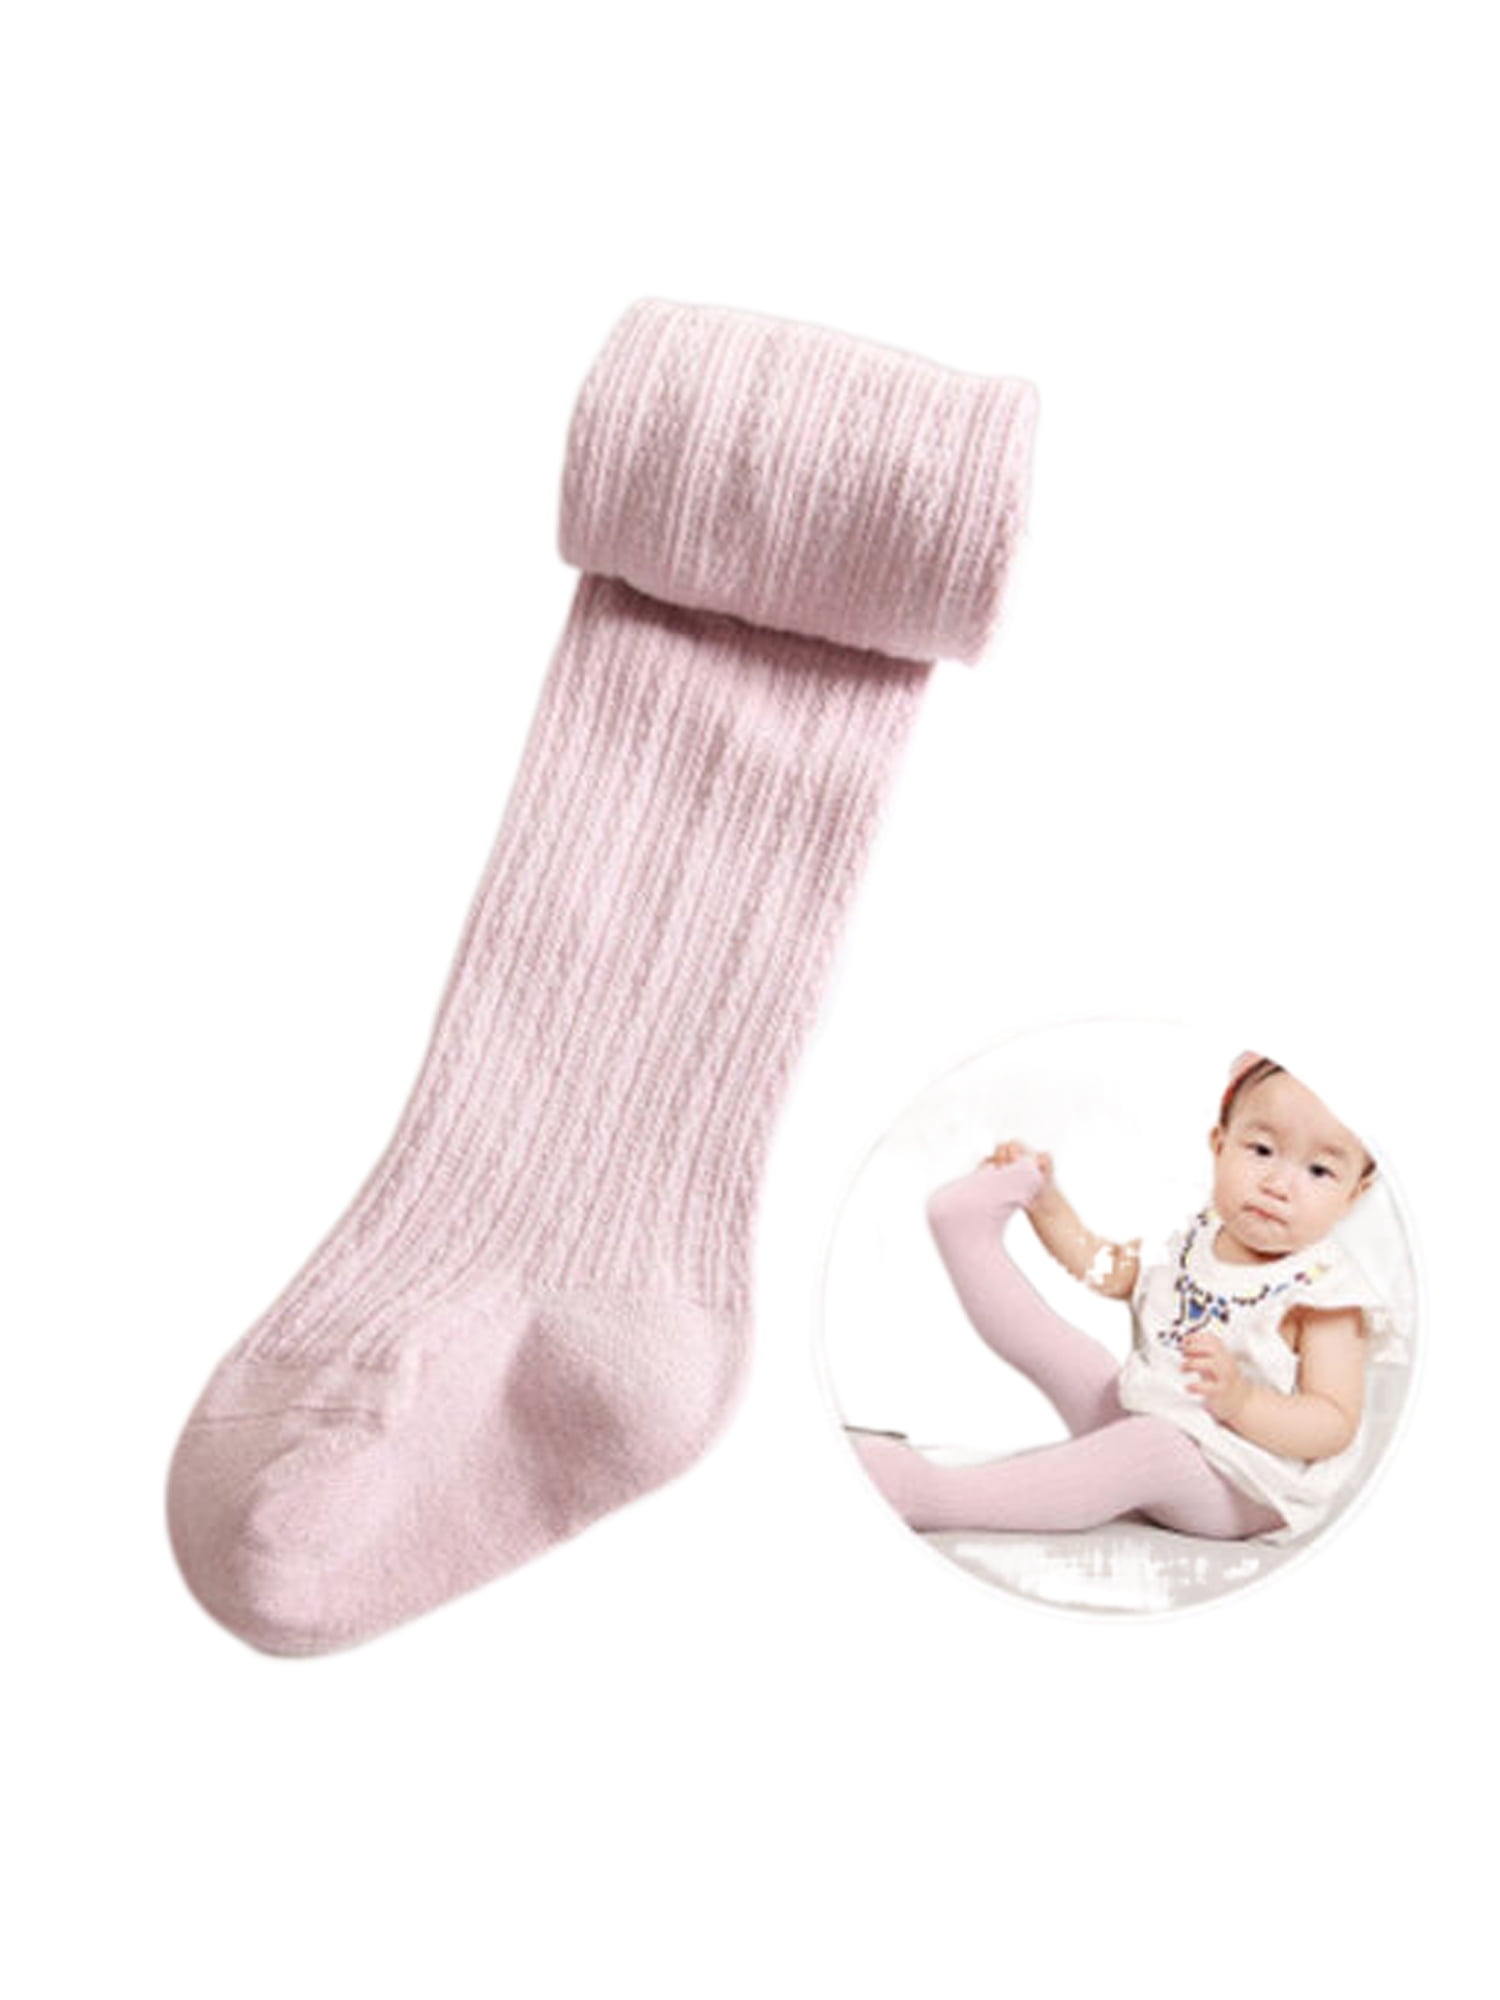 Baby Girls Tights Selected Cotton Knit Soft Kids Spring Fall Stocking Socks 6-48 Months 